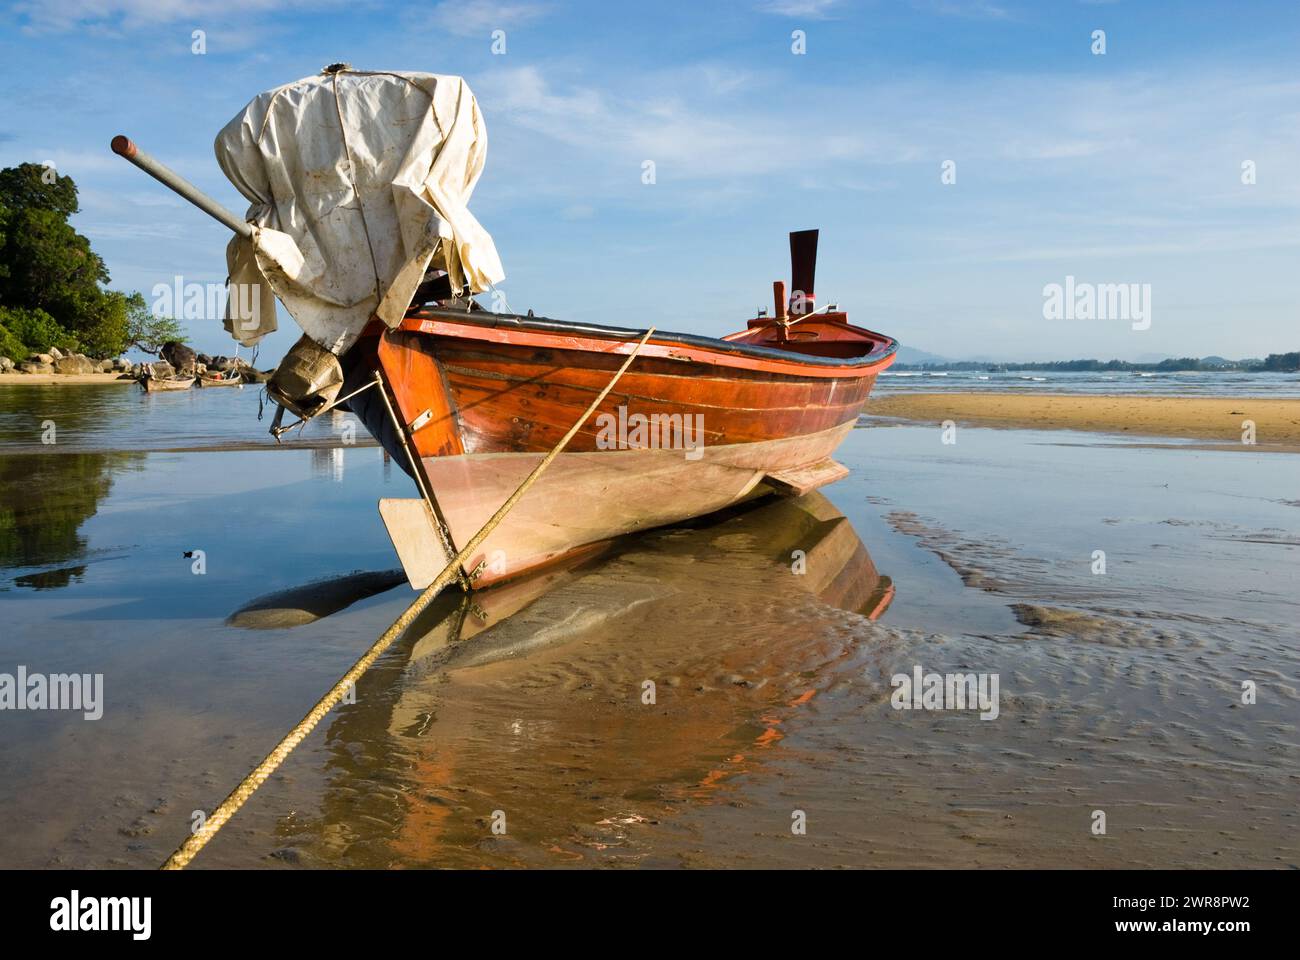 A wooden boat rests on the sandy shore beside the water Stock Photo